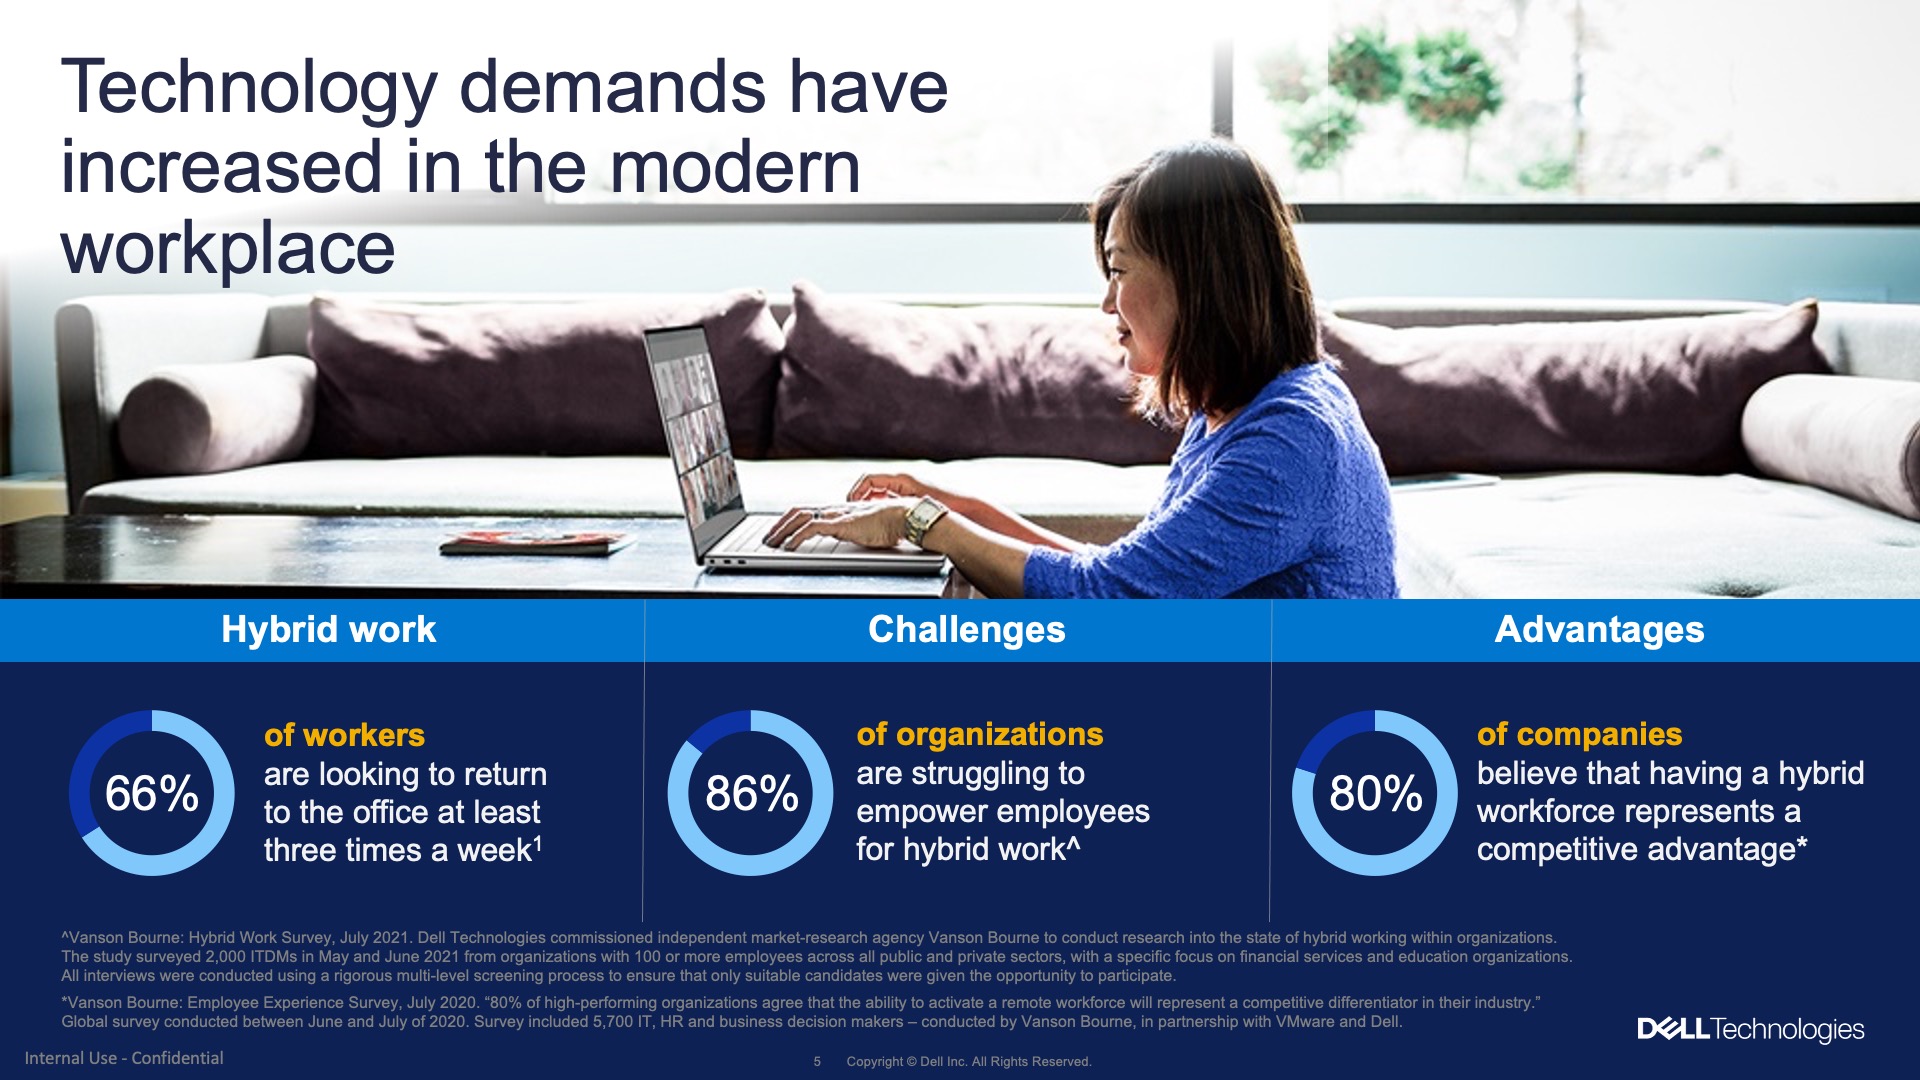 A slide from the PC-as-a-Service presentation. There is a woman working on a Dell laptop and stats about hybrid work challenges and advantages.